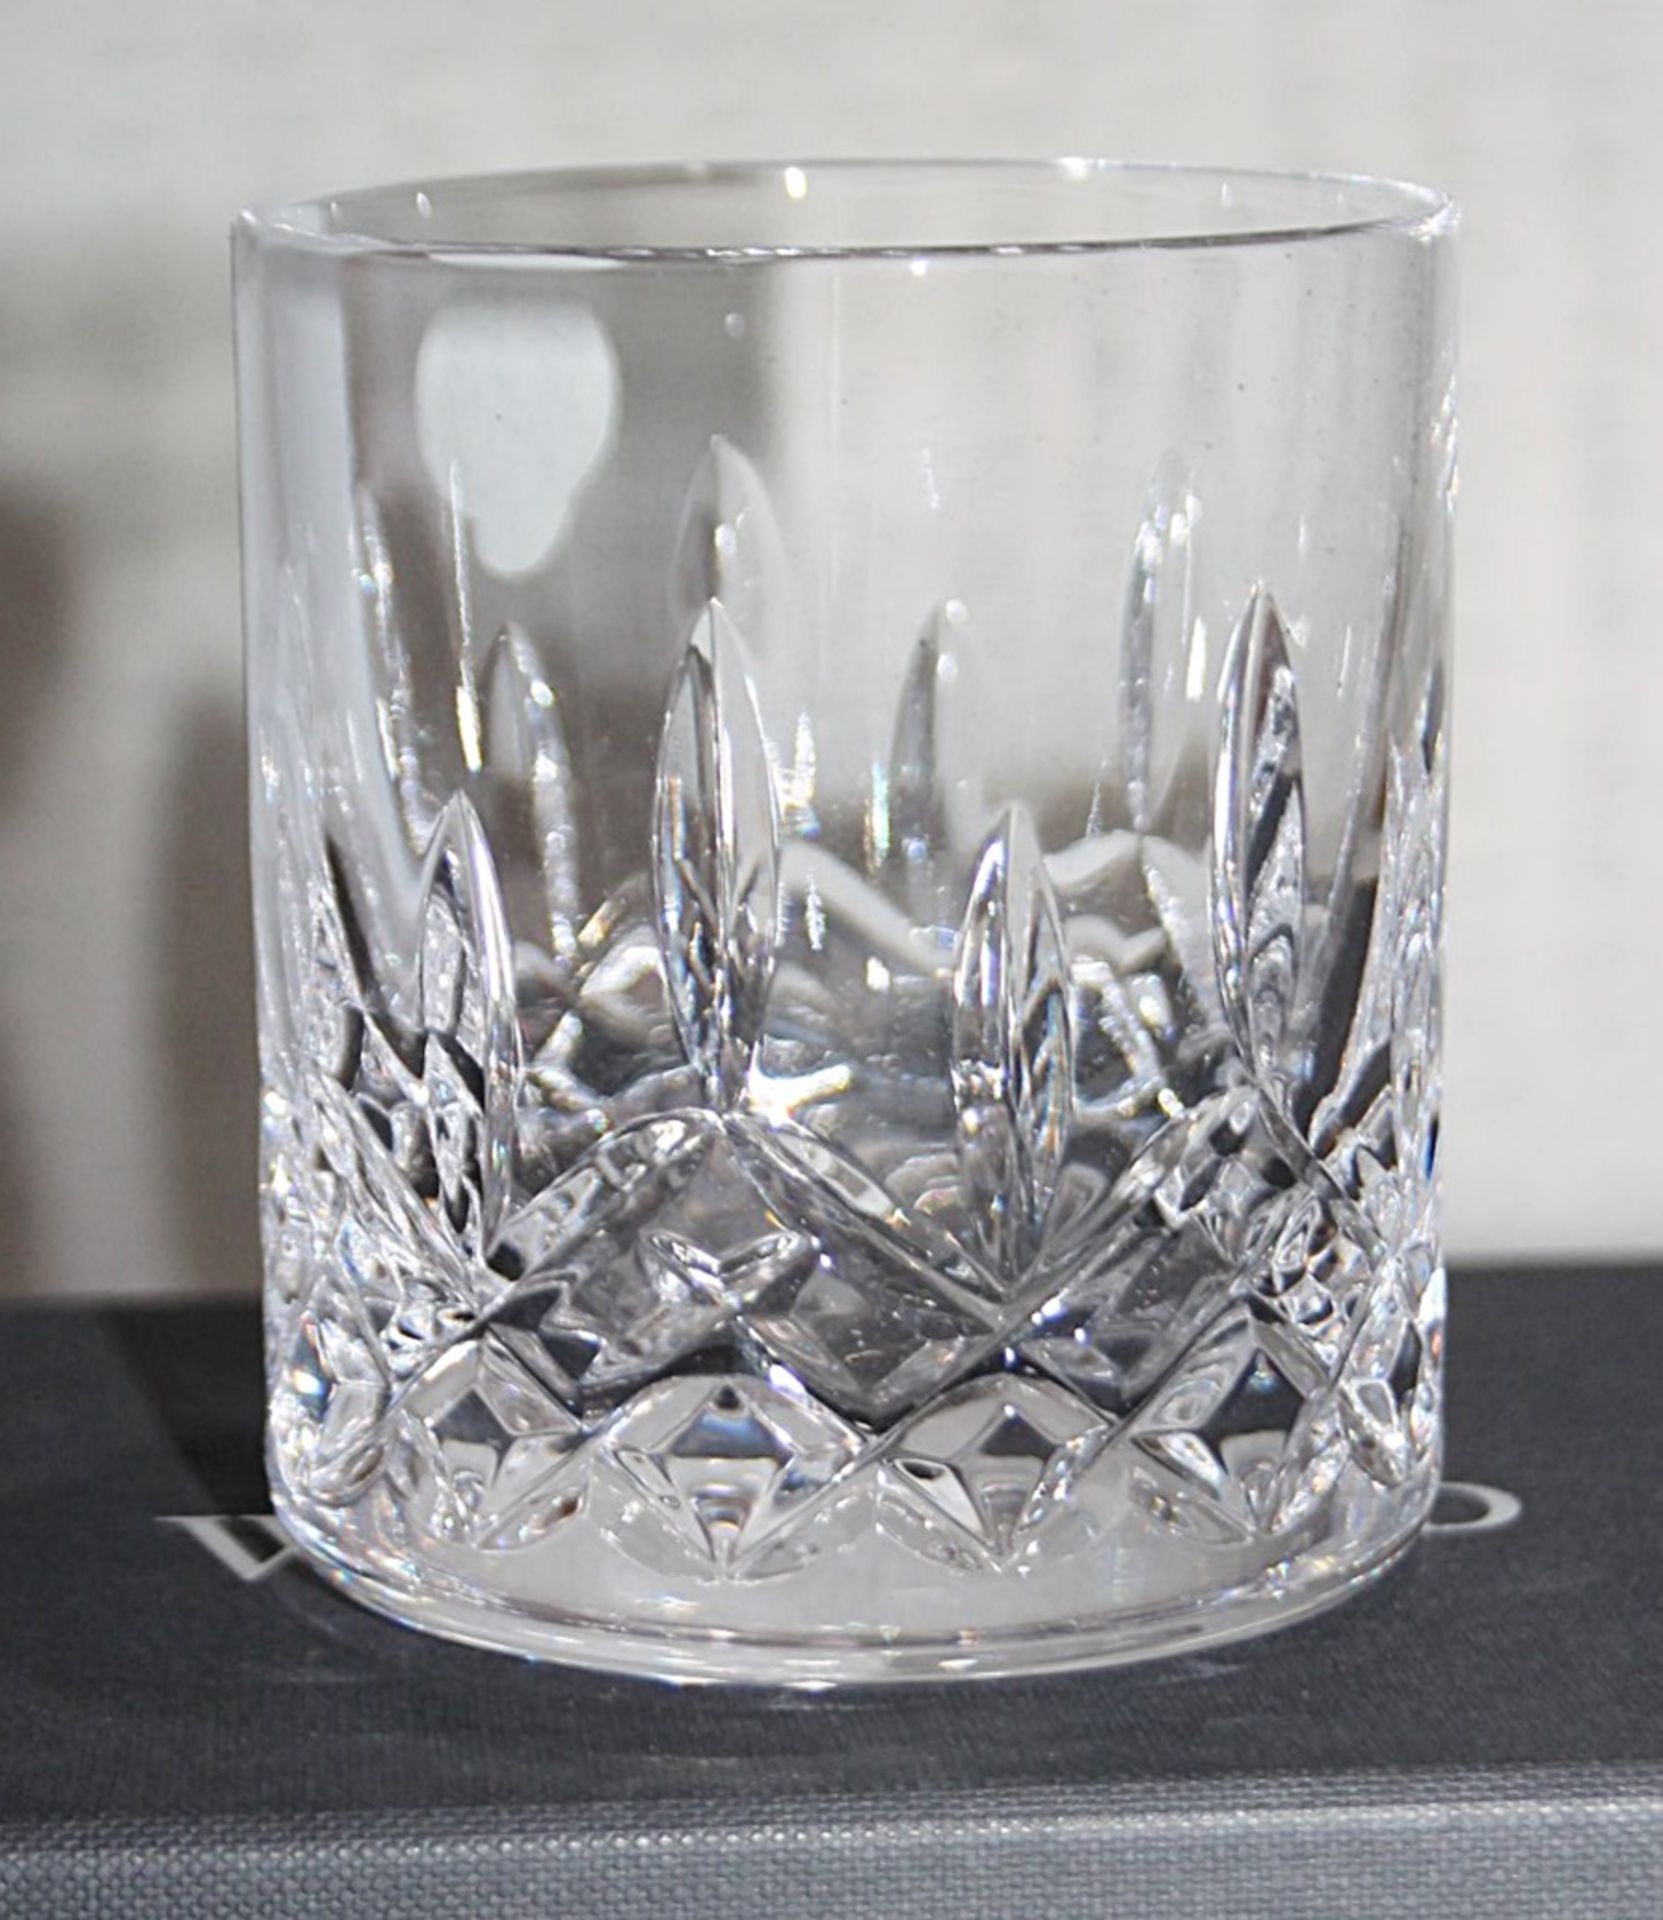 1 x WATERFORD CRYSTAL 'Lismore' Old Fashioned Tumbler - Original Price £55.00 - Unused Boxed Stock